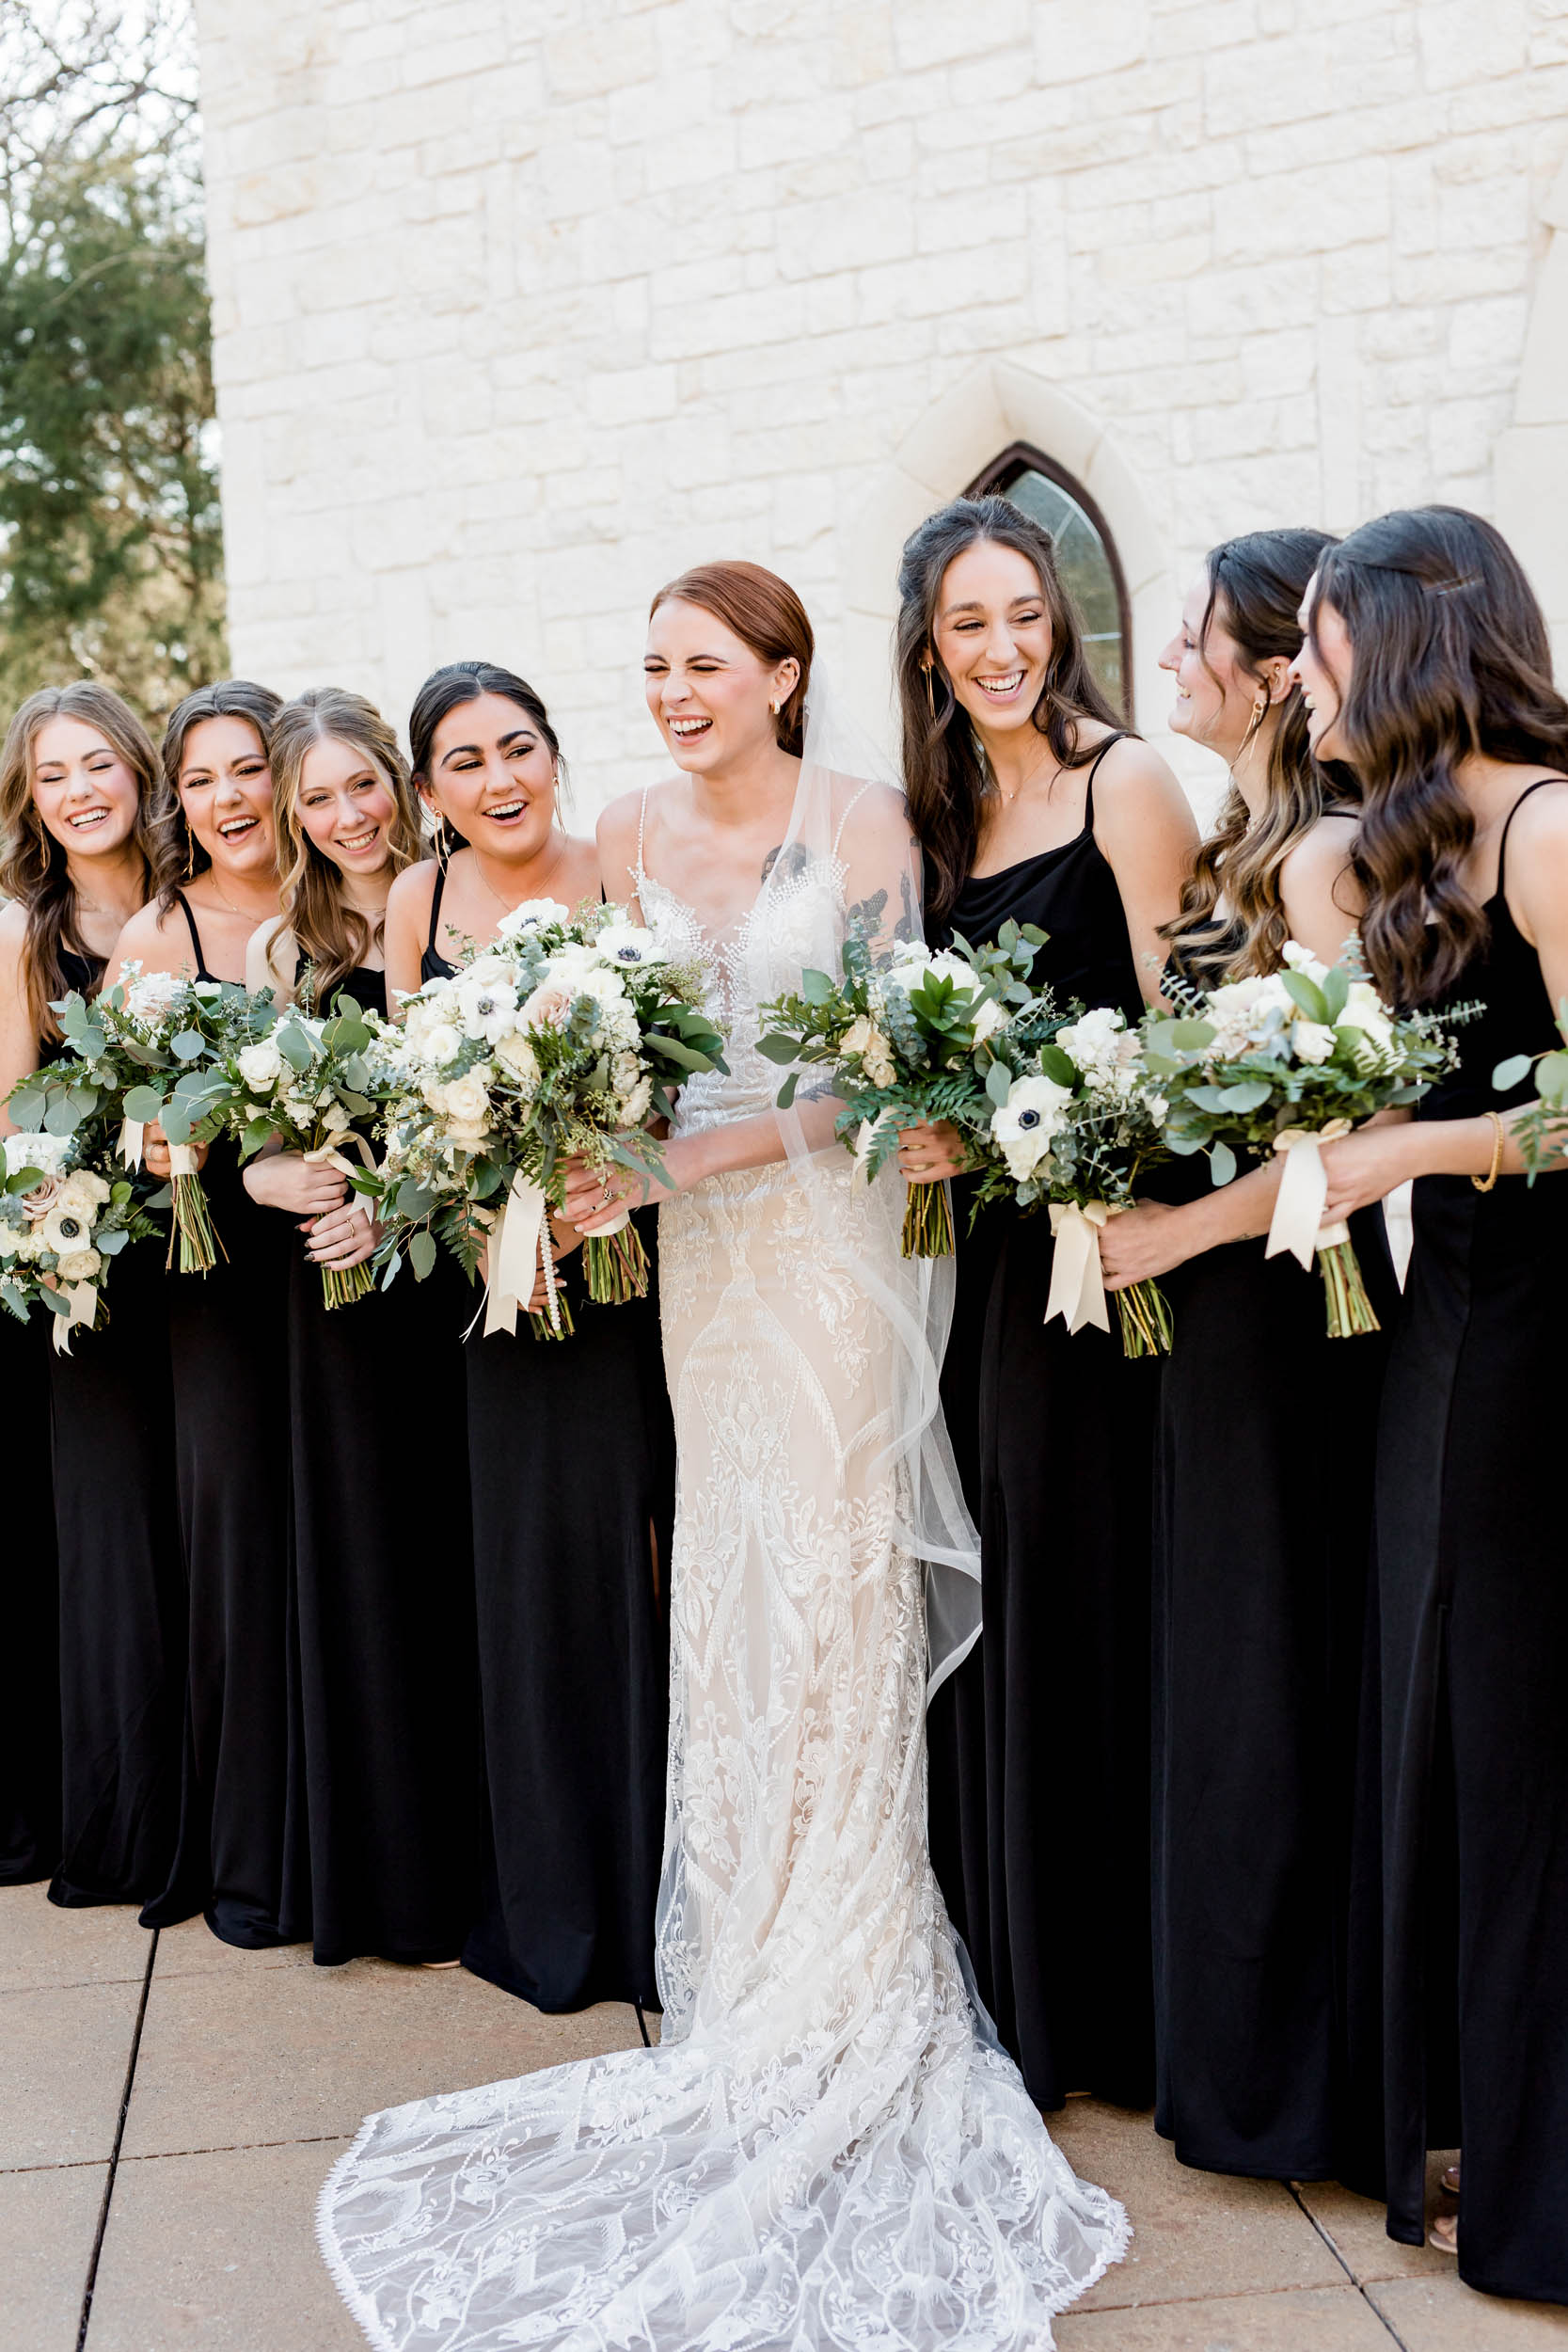 Bride and Bridesmaids Smiling Posed Outside Ceremony Chapel